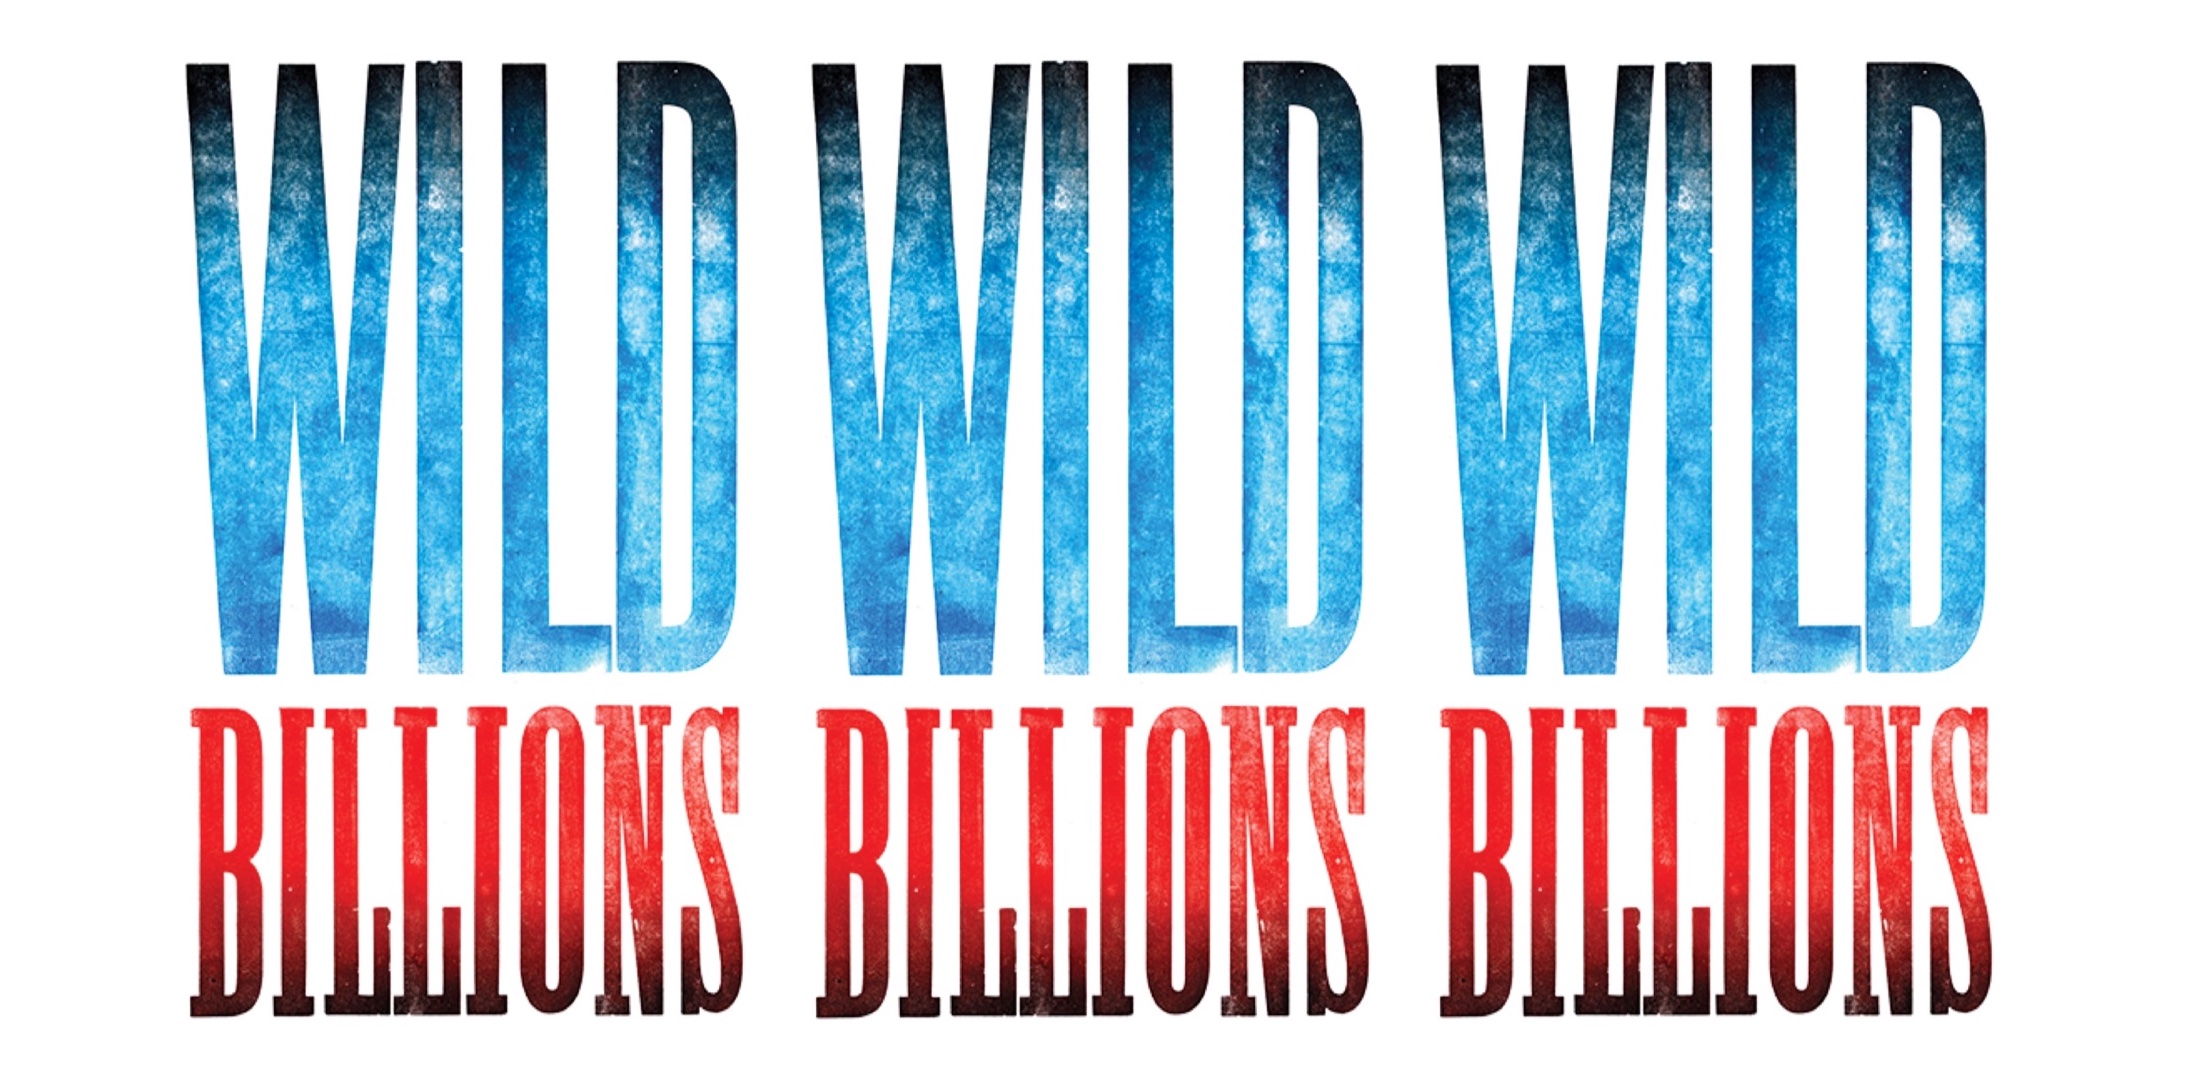 How Do I Get My Hands on These ‘Wild Billions,’ Anyway?